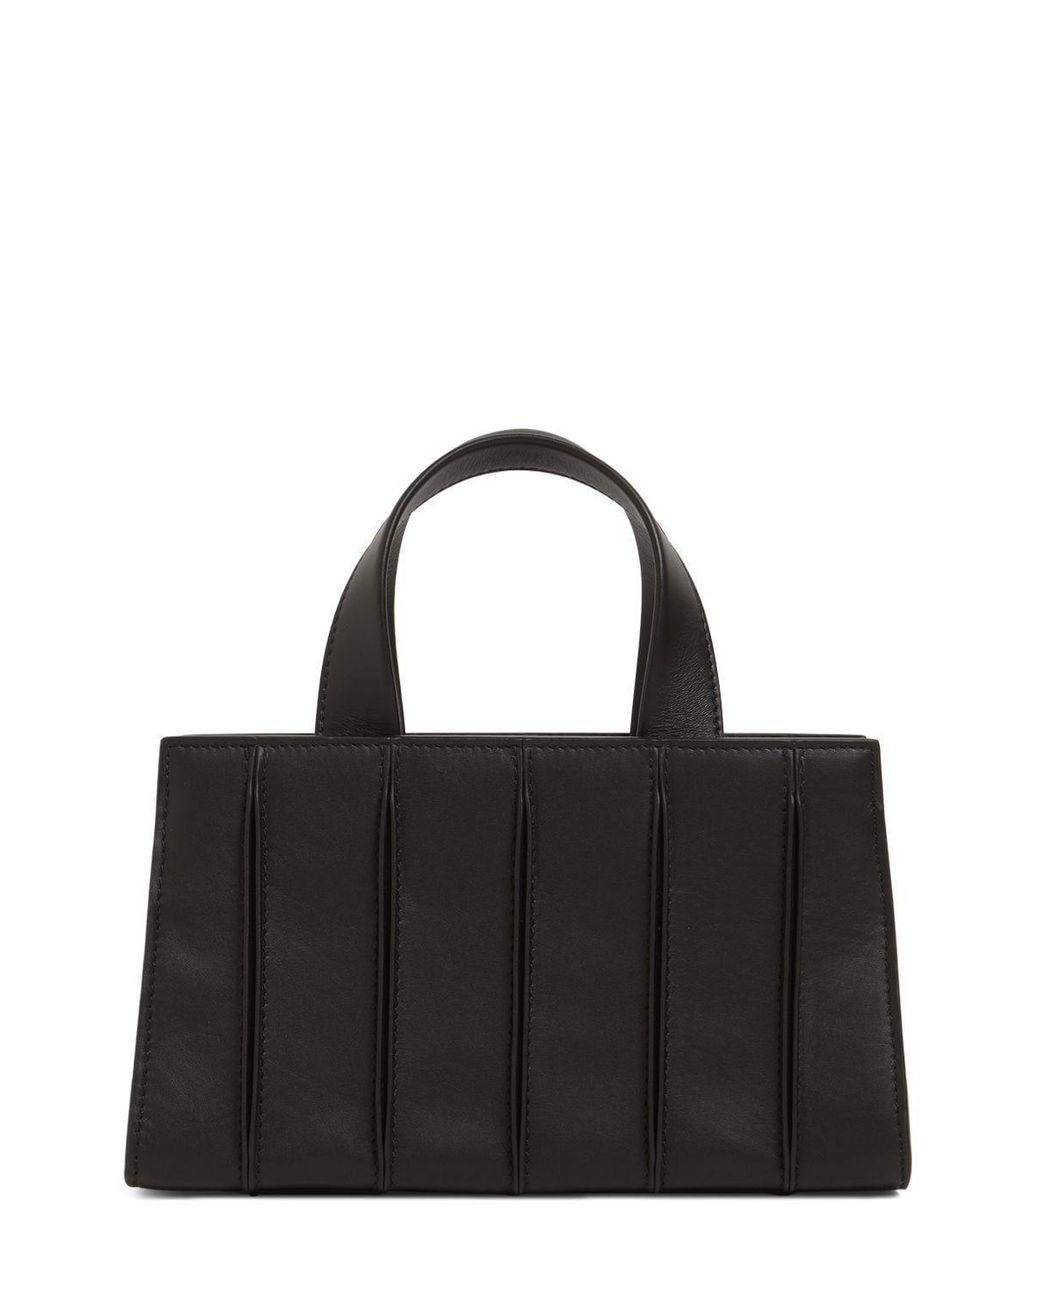 Max Mara Whitney Glam Leather Top Handle Bag in Black | Lyst